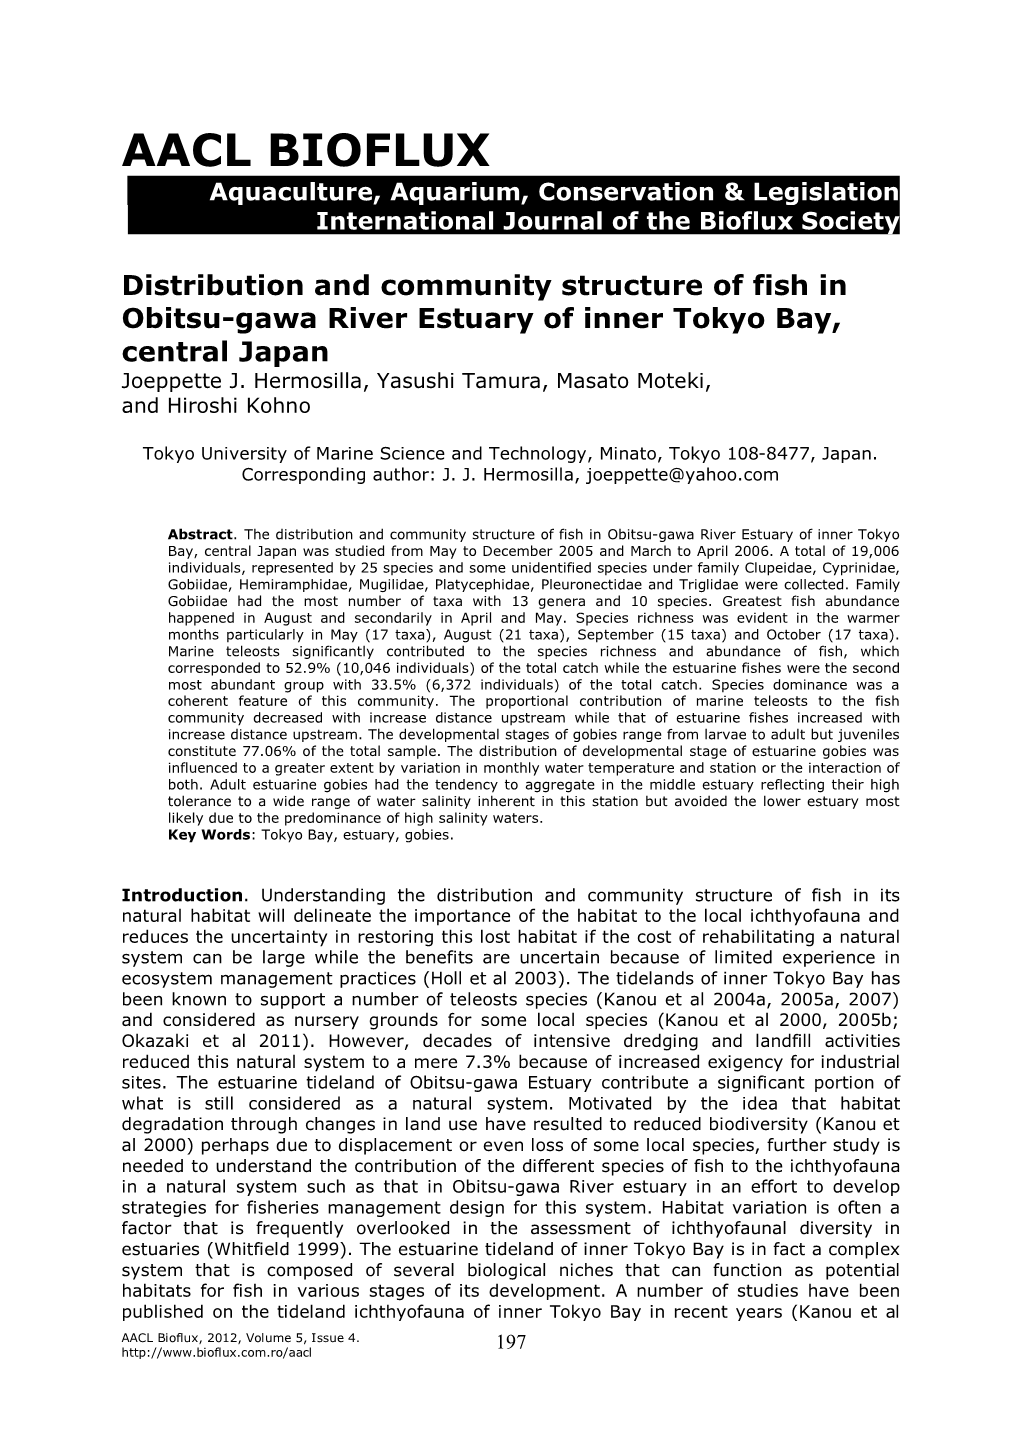 Distribution and Community Structure of Fish in Obitsu-Gawa River Estuary of Inner Tokyo Bay, Central Japan Joeppette J